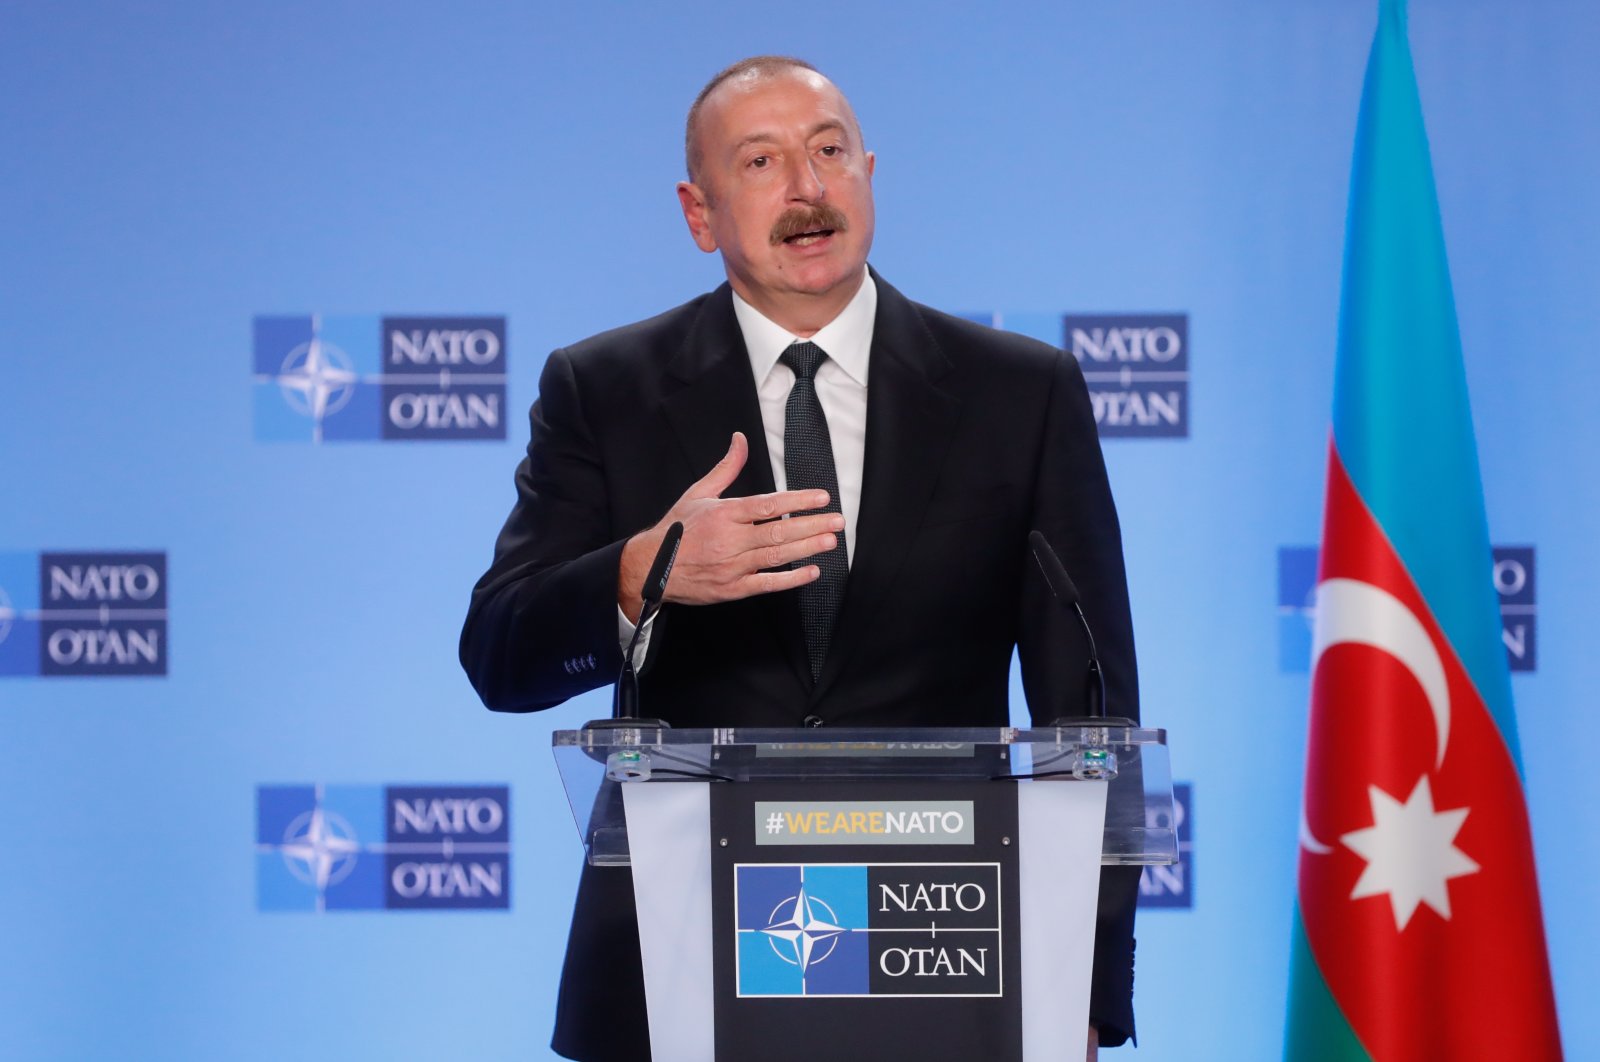 Azerbaijani President Ilham Aliyev attends a joint press conference with NATO Secretary General Jens Stoltenberg in Brussels, Belgium, Dec. 14 2021. (EPA Photo)